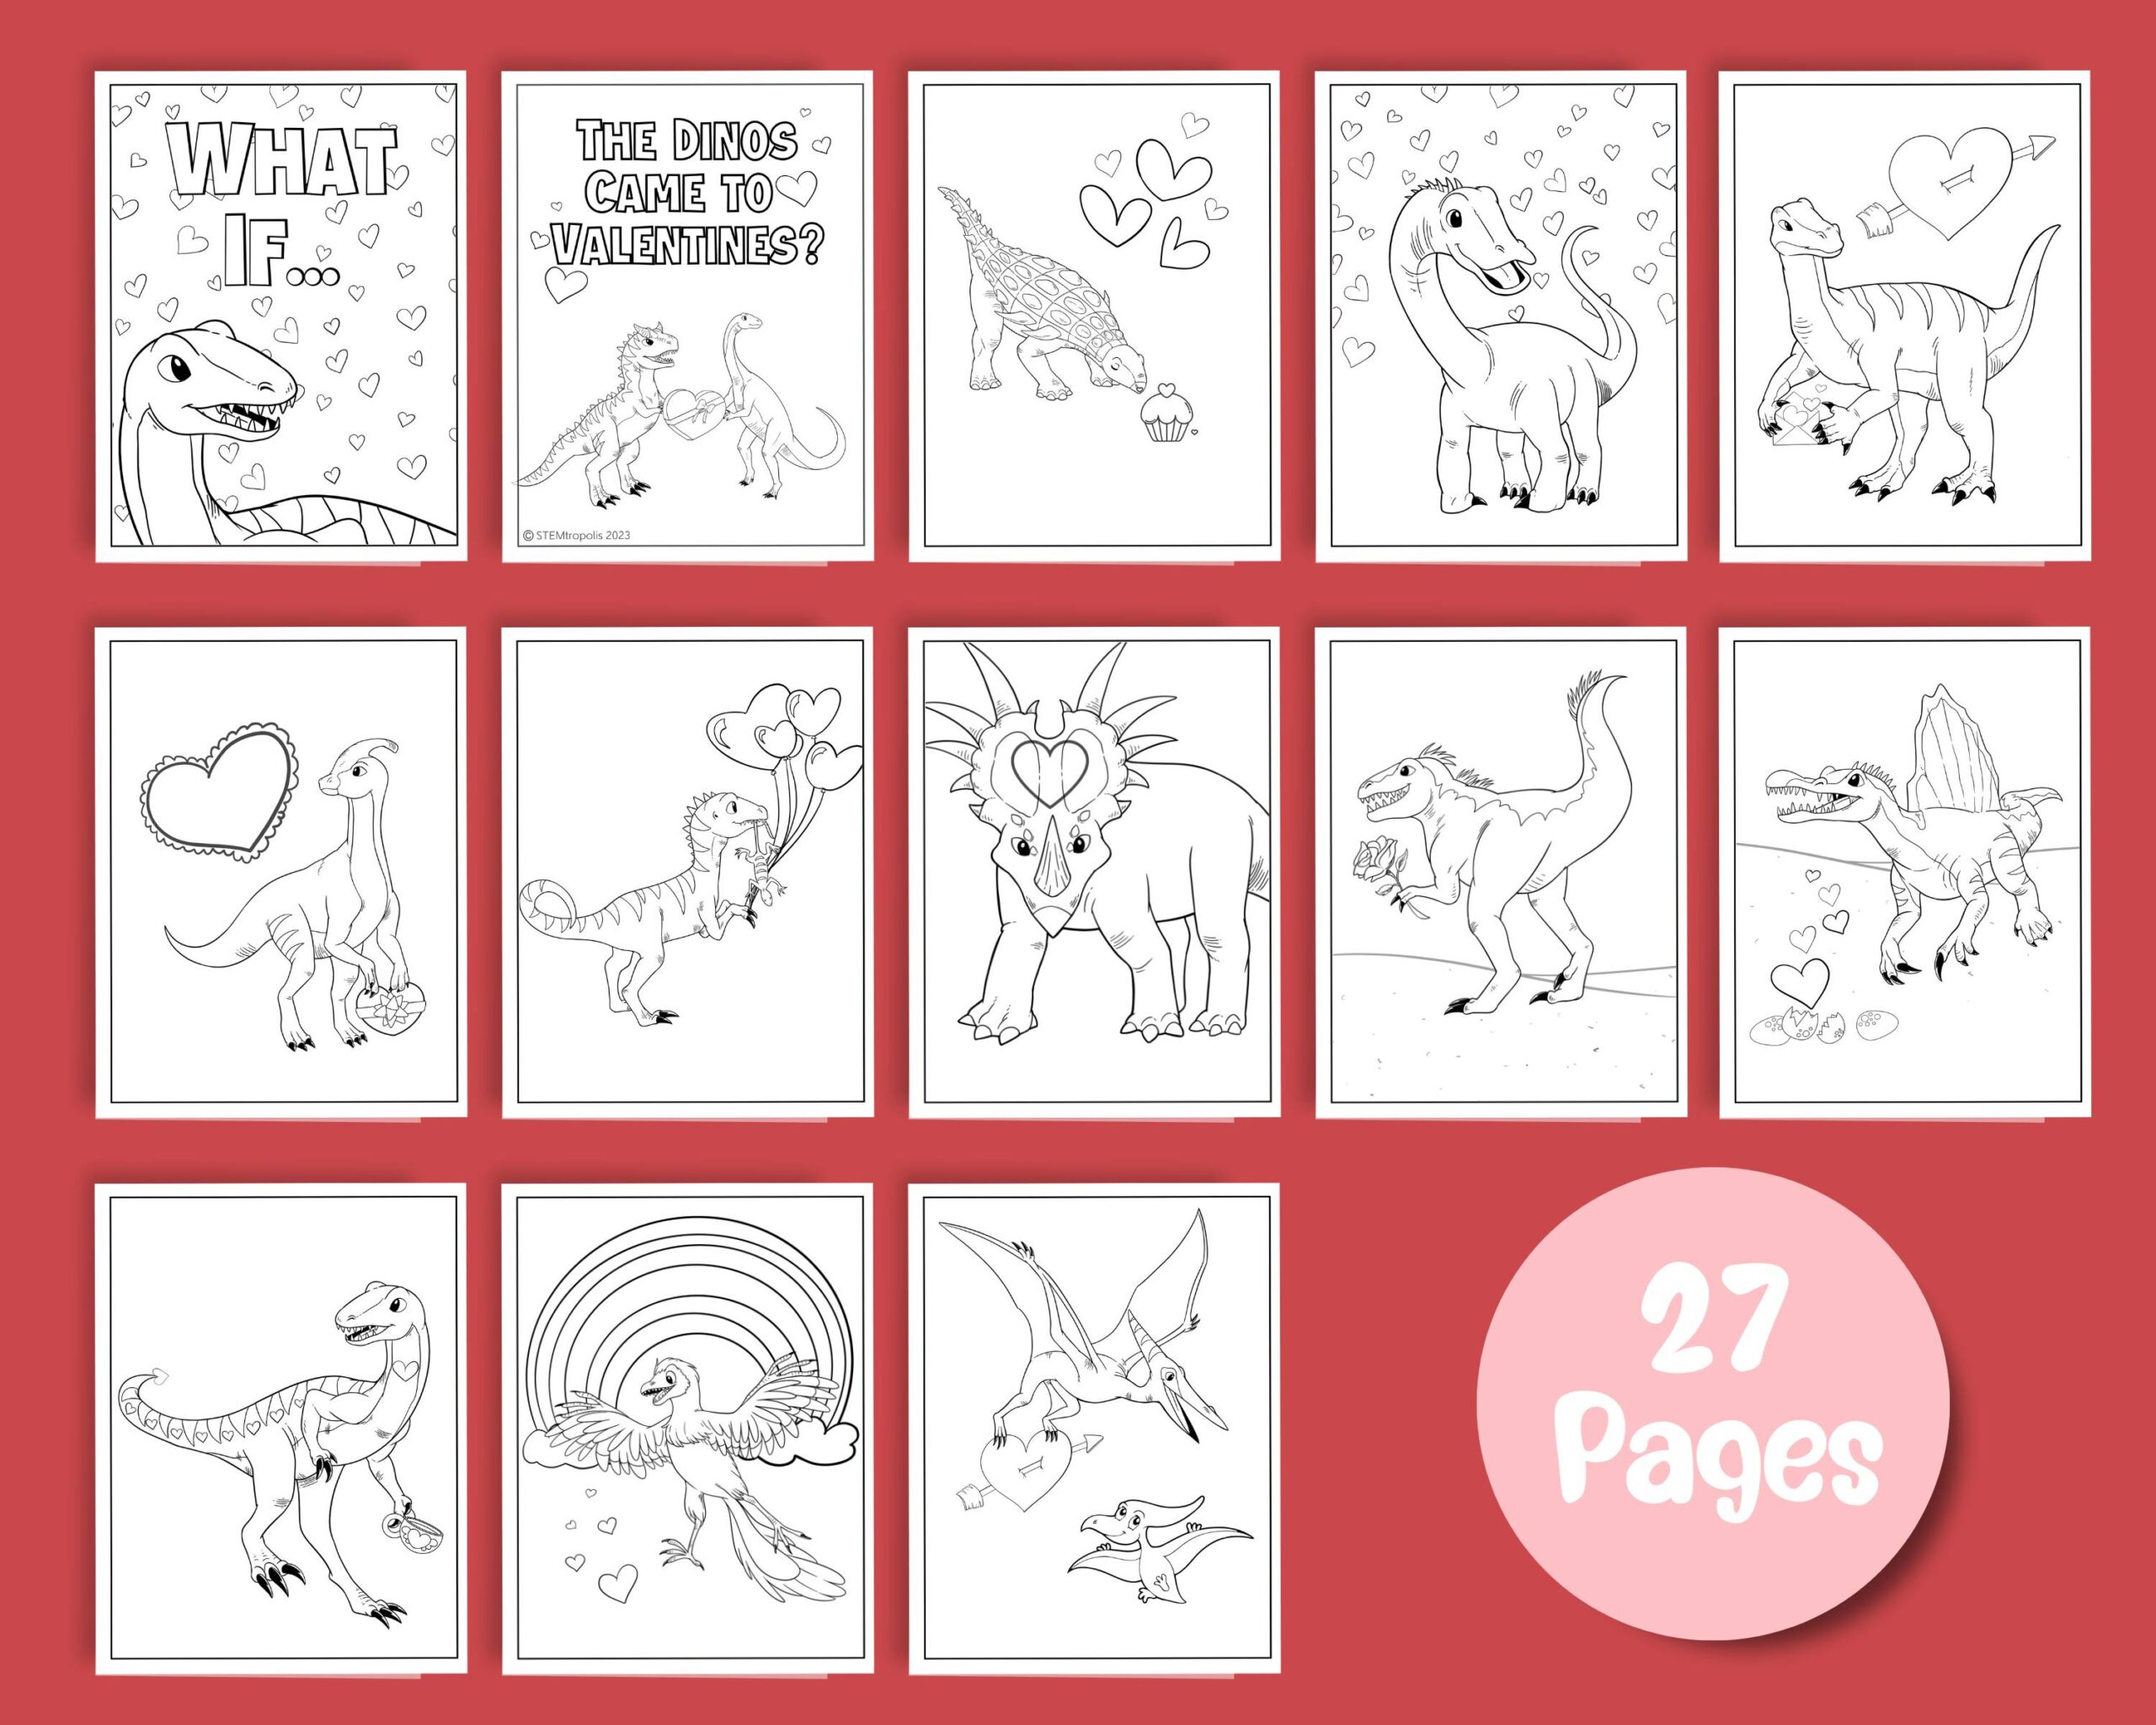 Dinosaur Valentines Coloring Pages